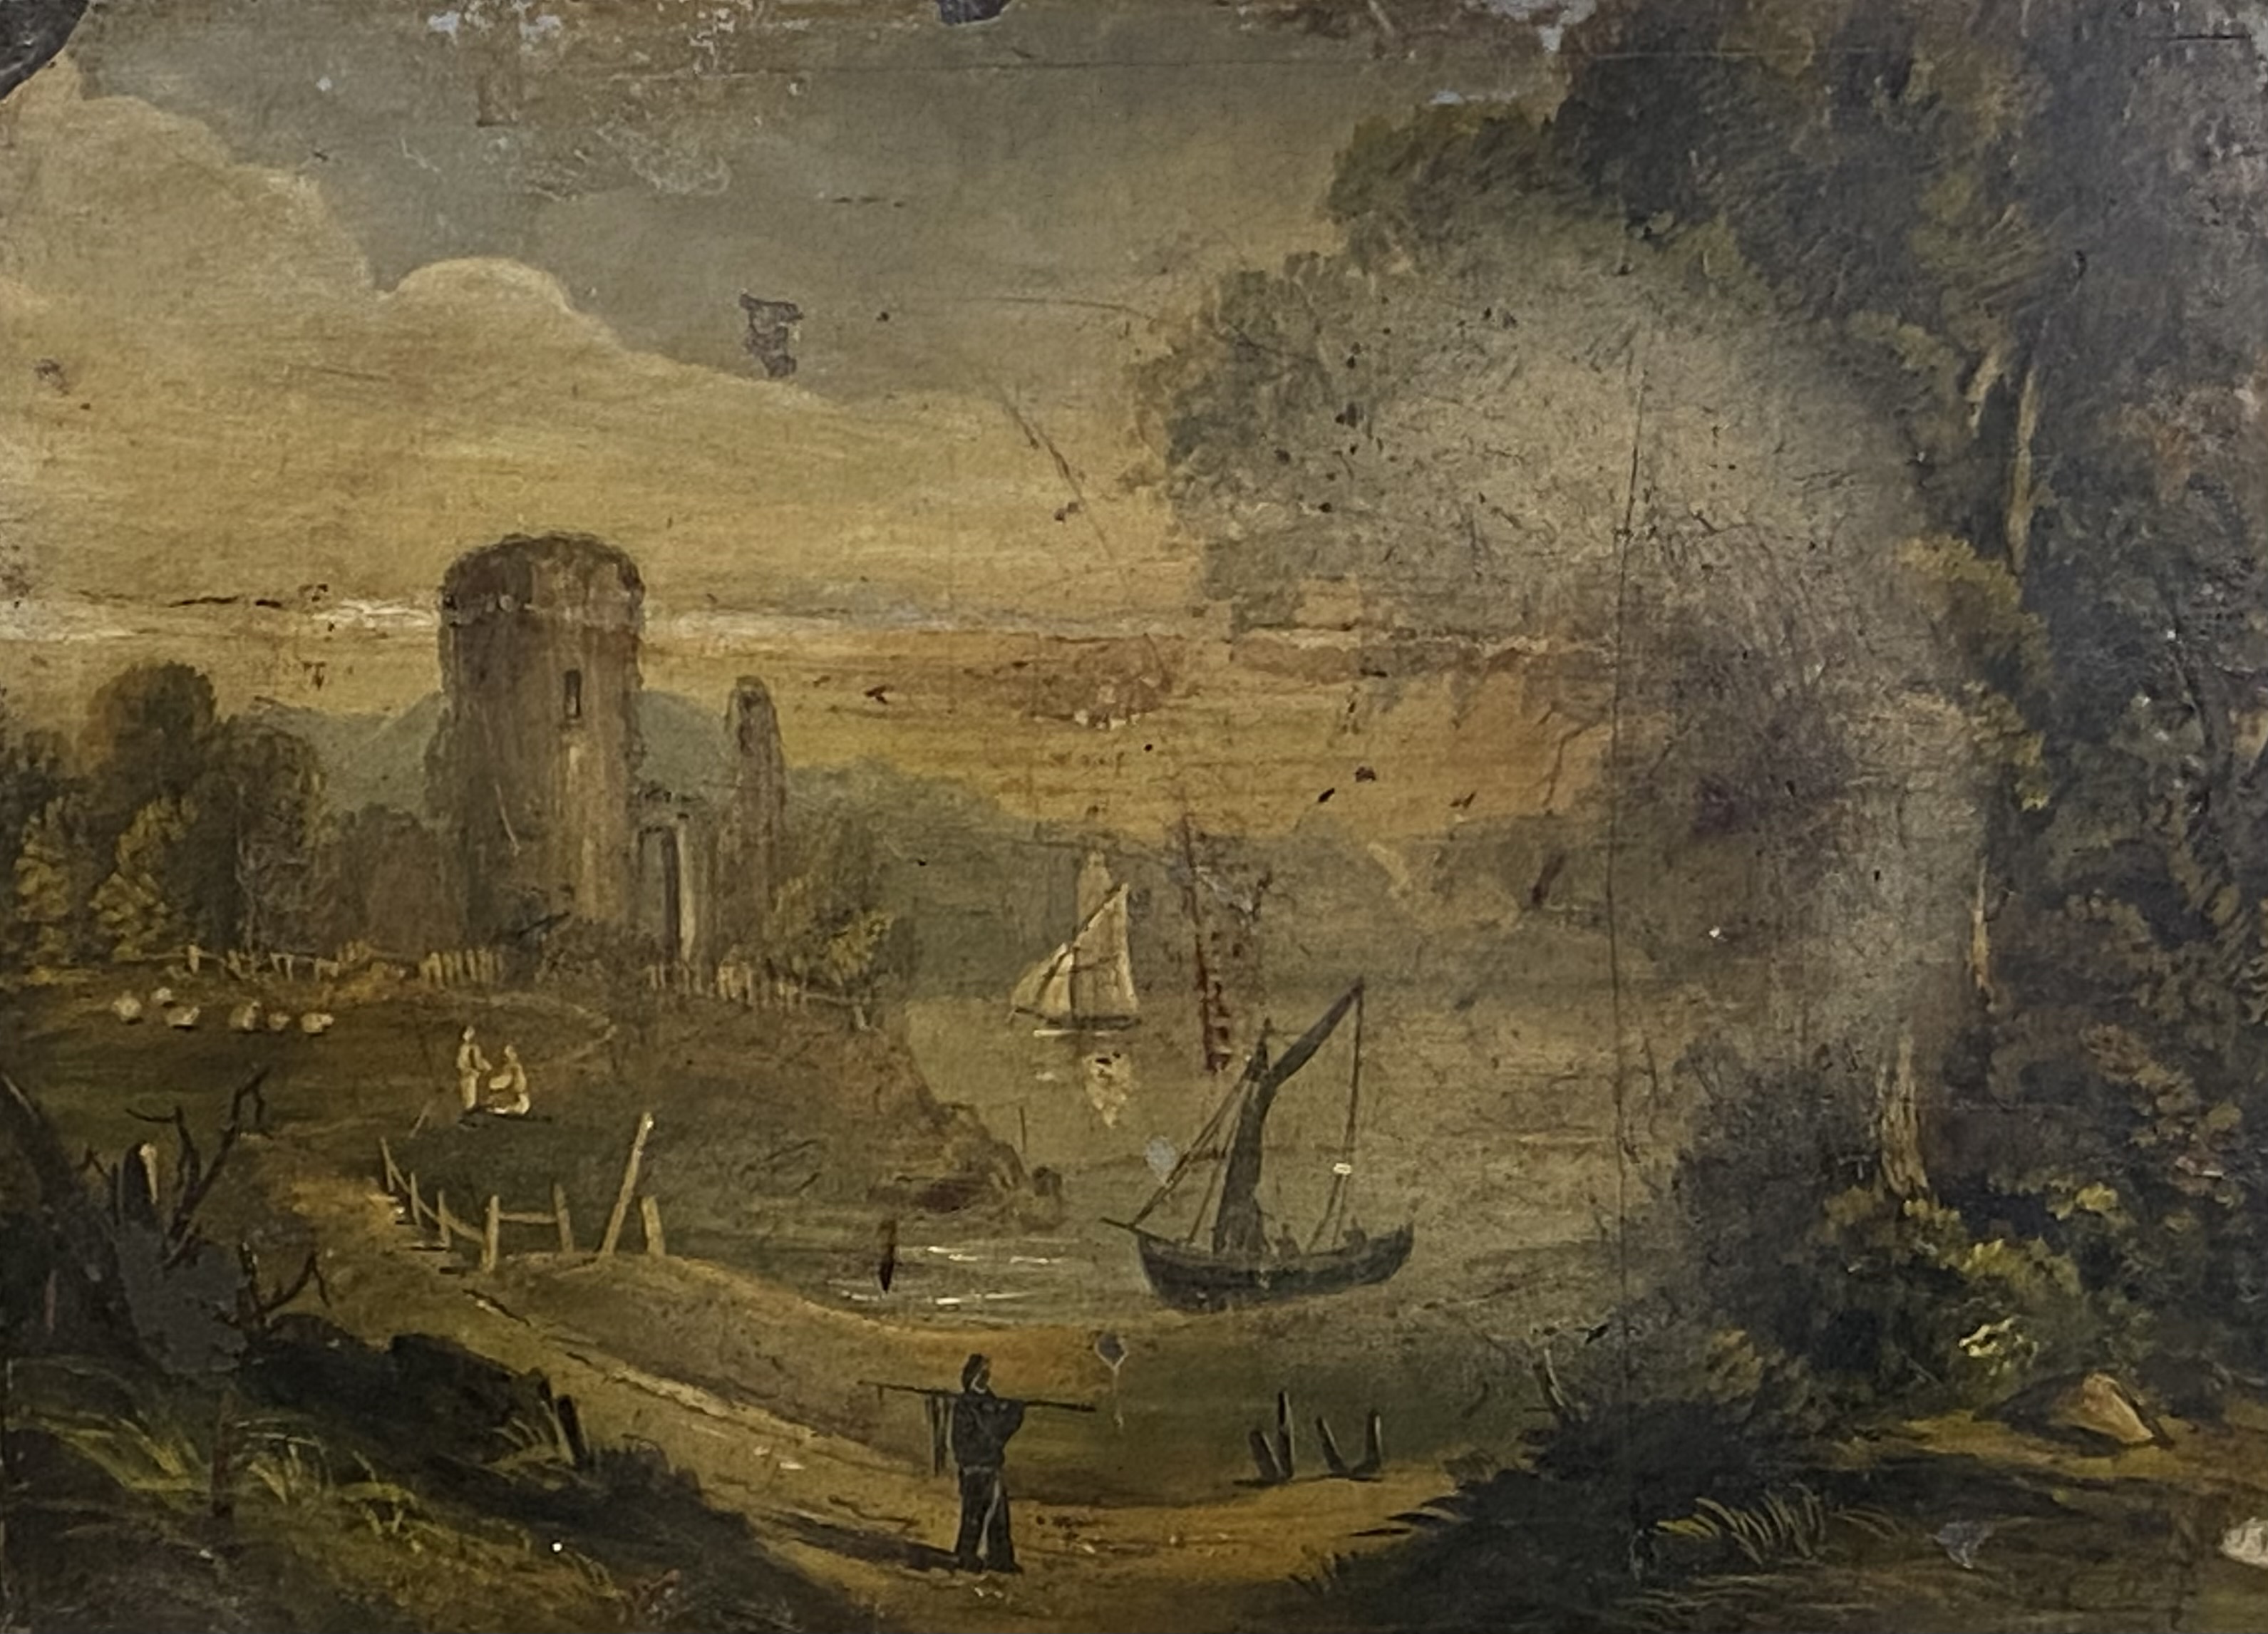 Paint on slate of a harbour scene